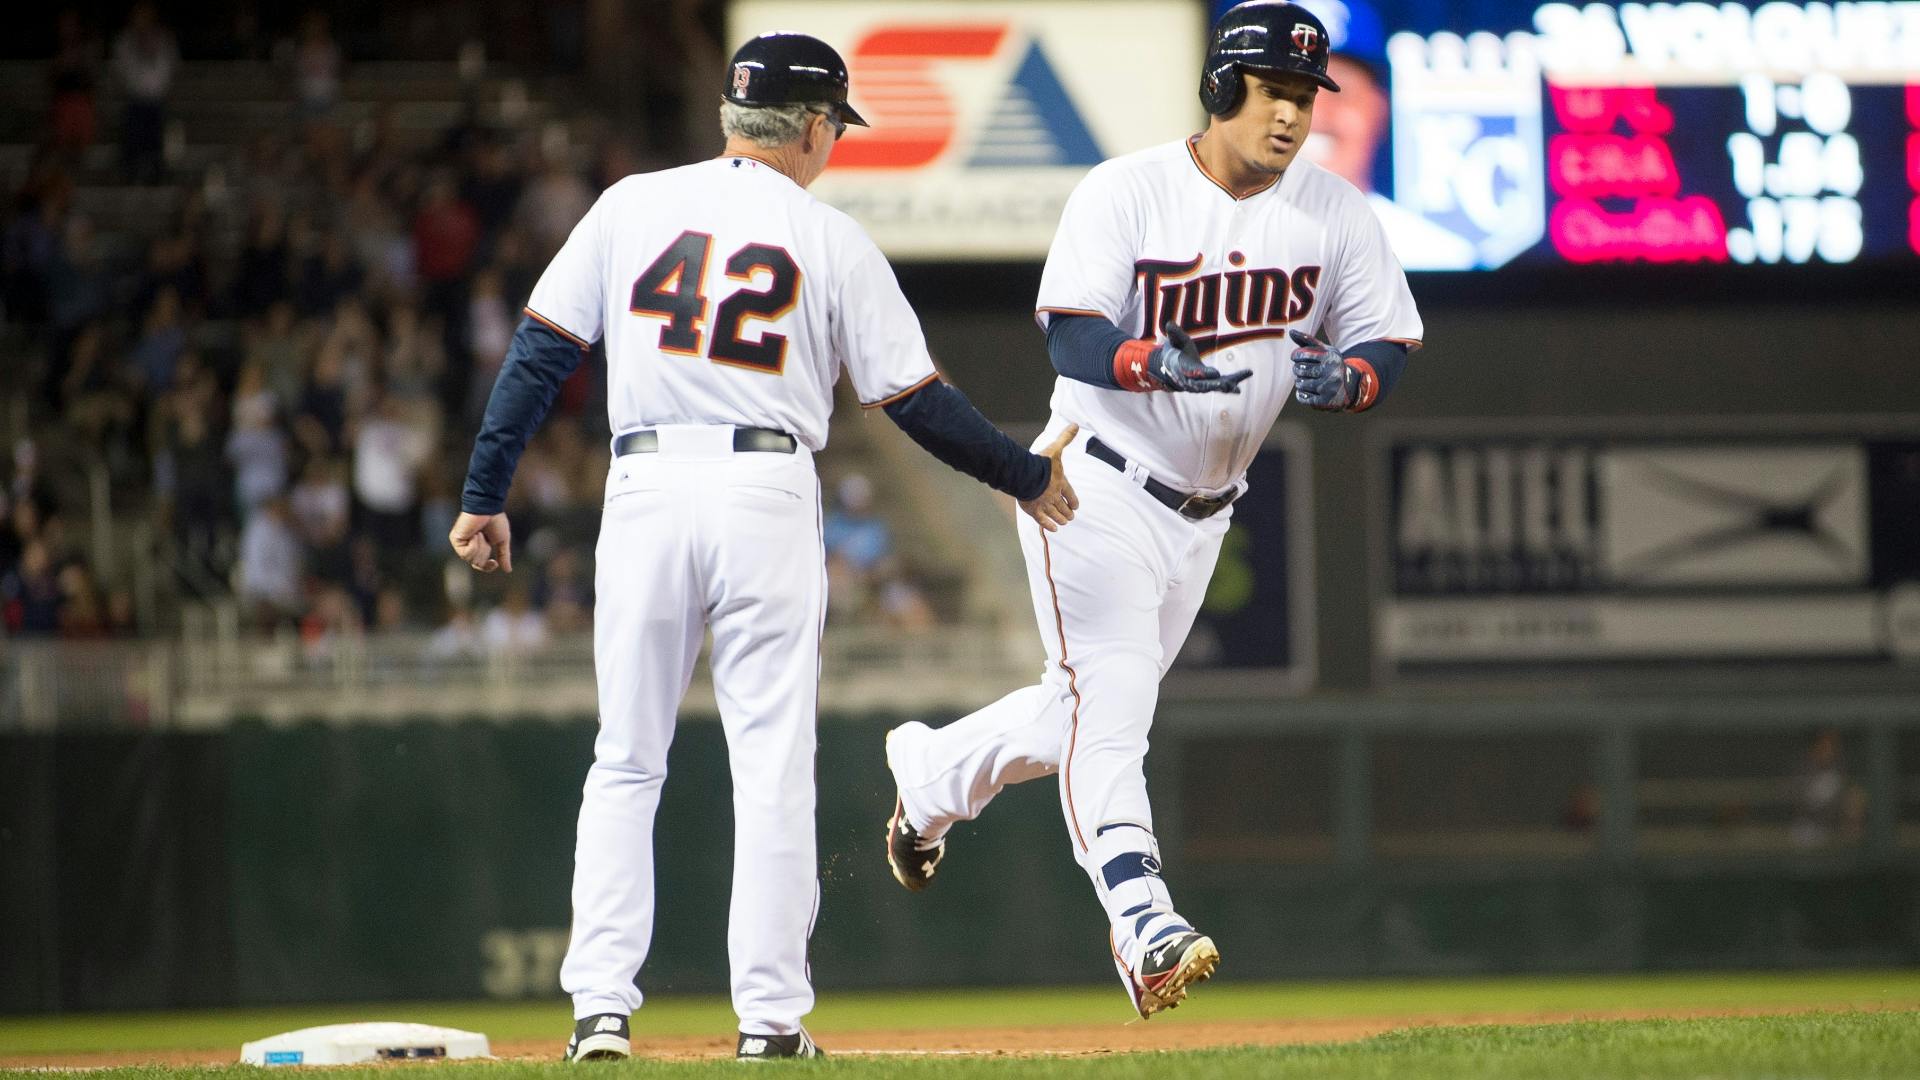 Oswaldo Arica's two-run home run was the difference in the Twins' win over Royals